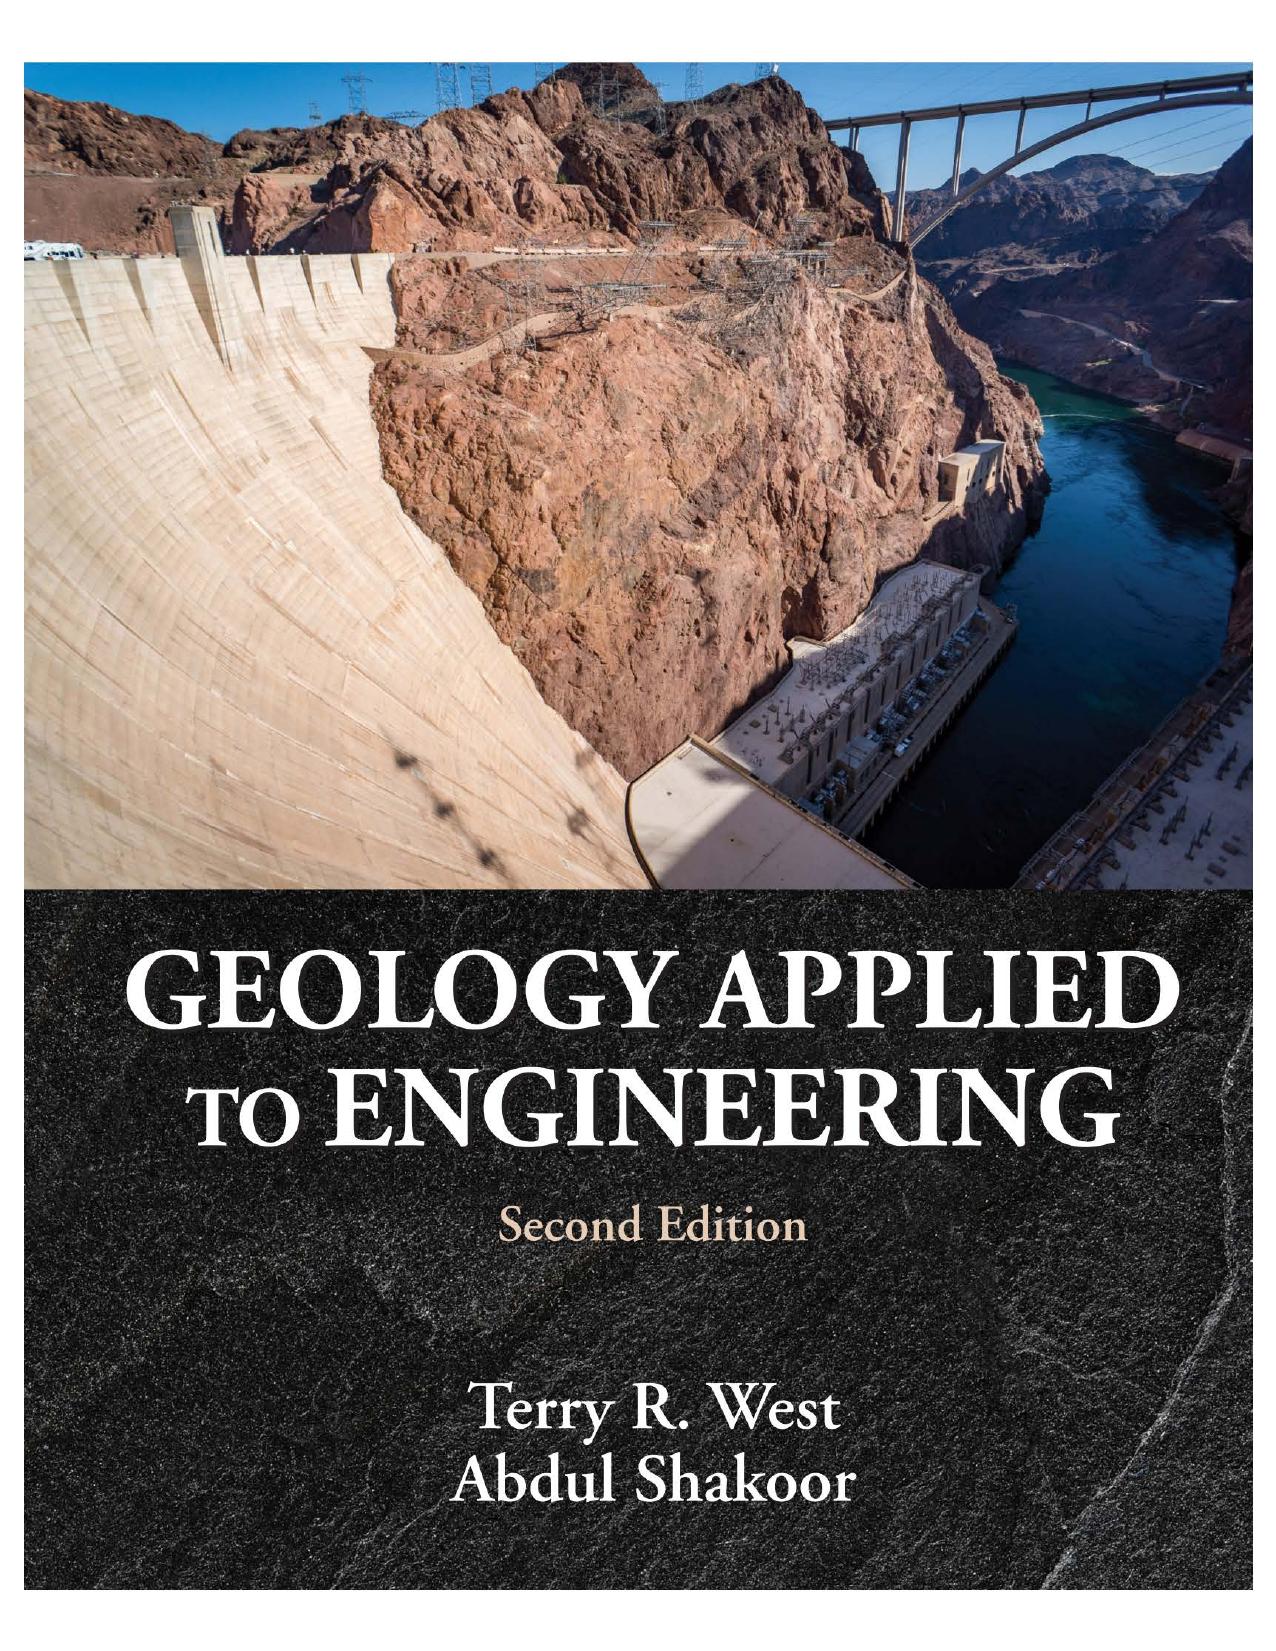 Geology Applied to Engineering by Terry R. West Abdul Shakoor